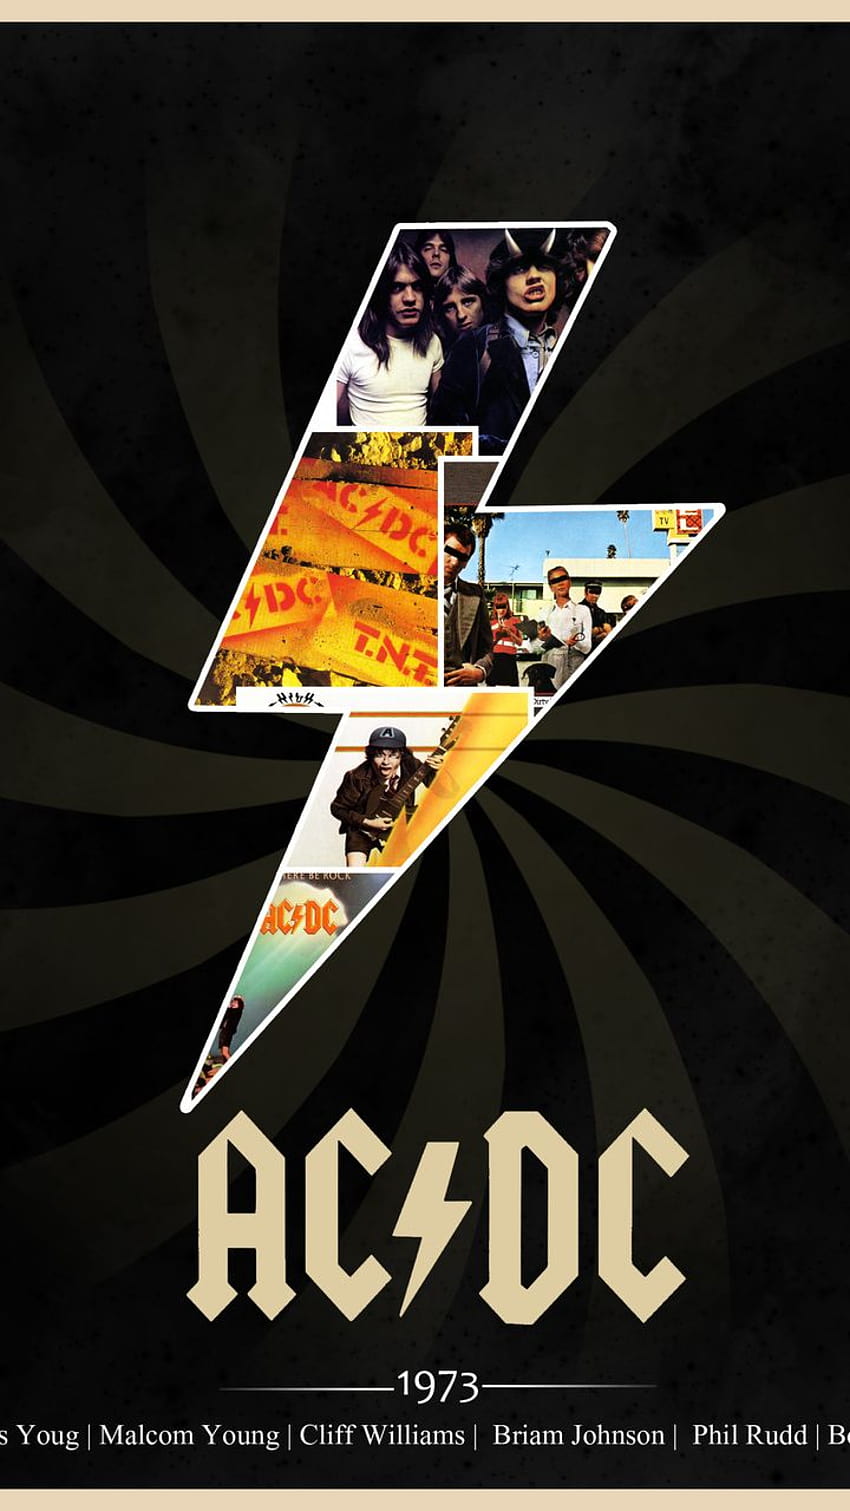 1973, Album Covers, Rock, Acdc, Classic, android cover album HD phone wallpaper